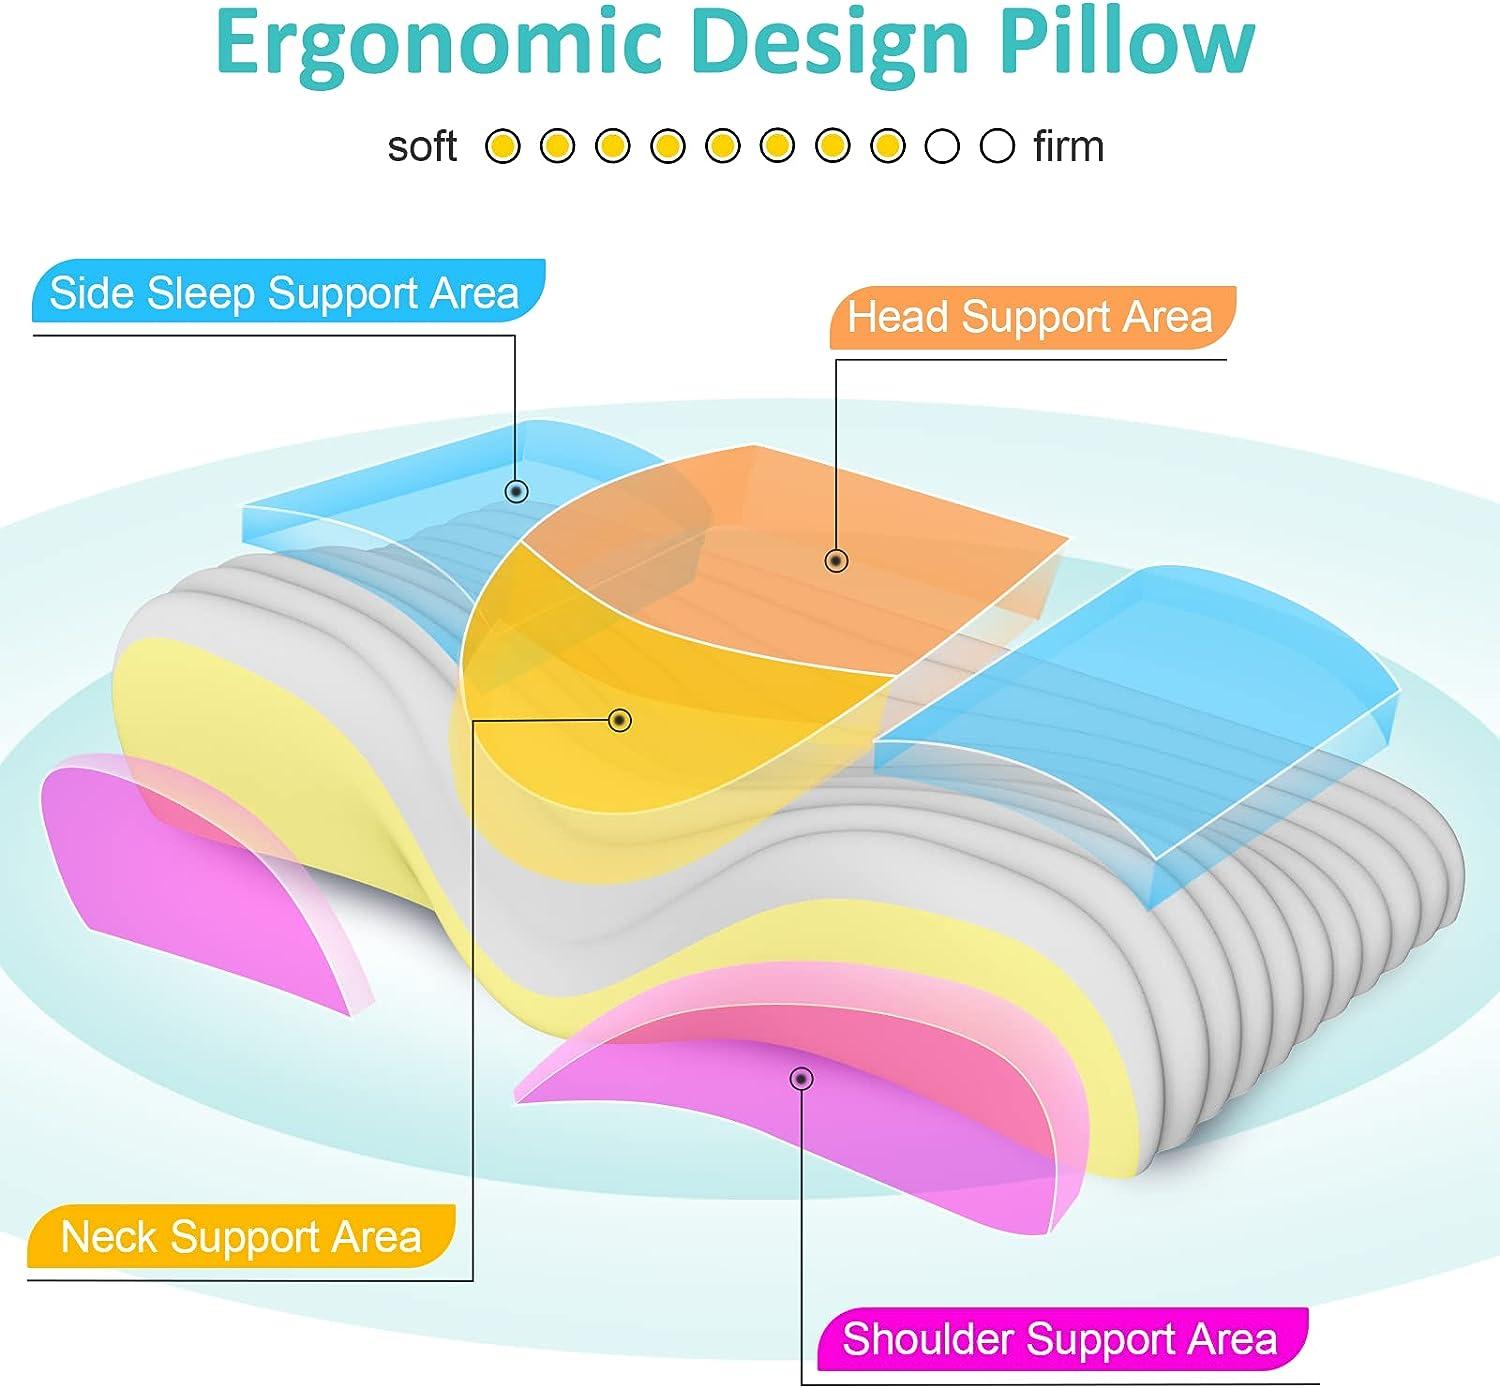 Experience Comfort and Relief with Gugusure Lumbar Support Pillow